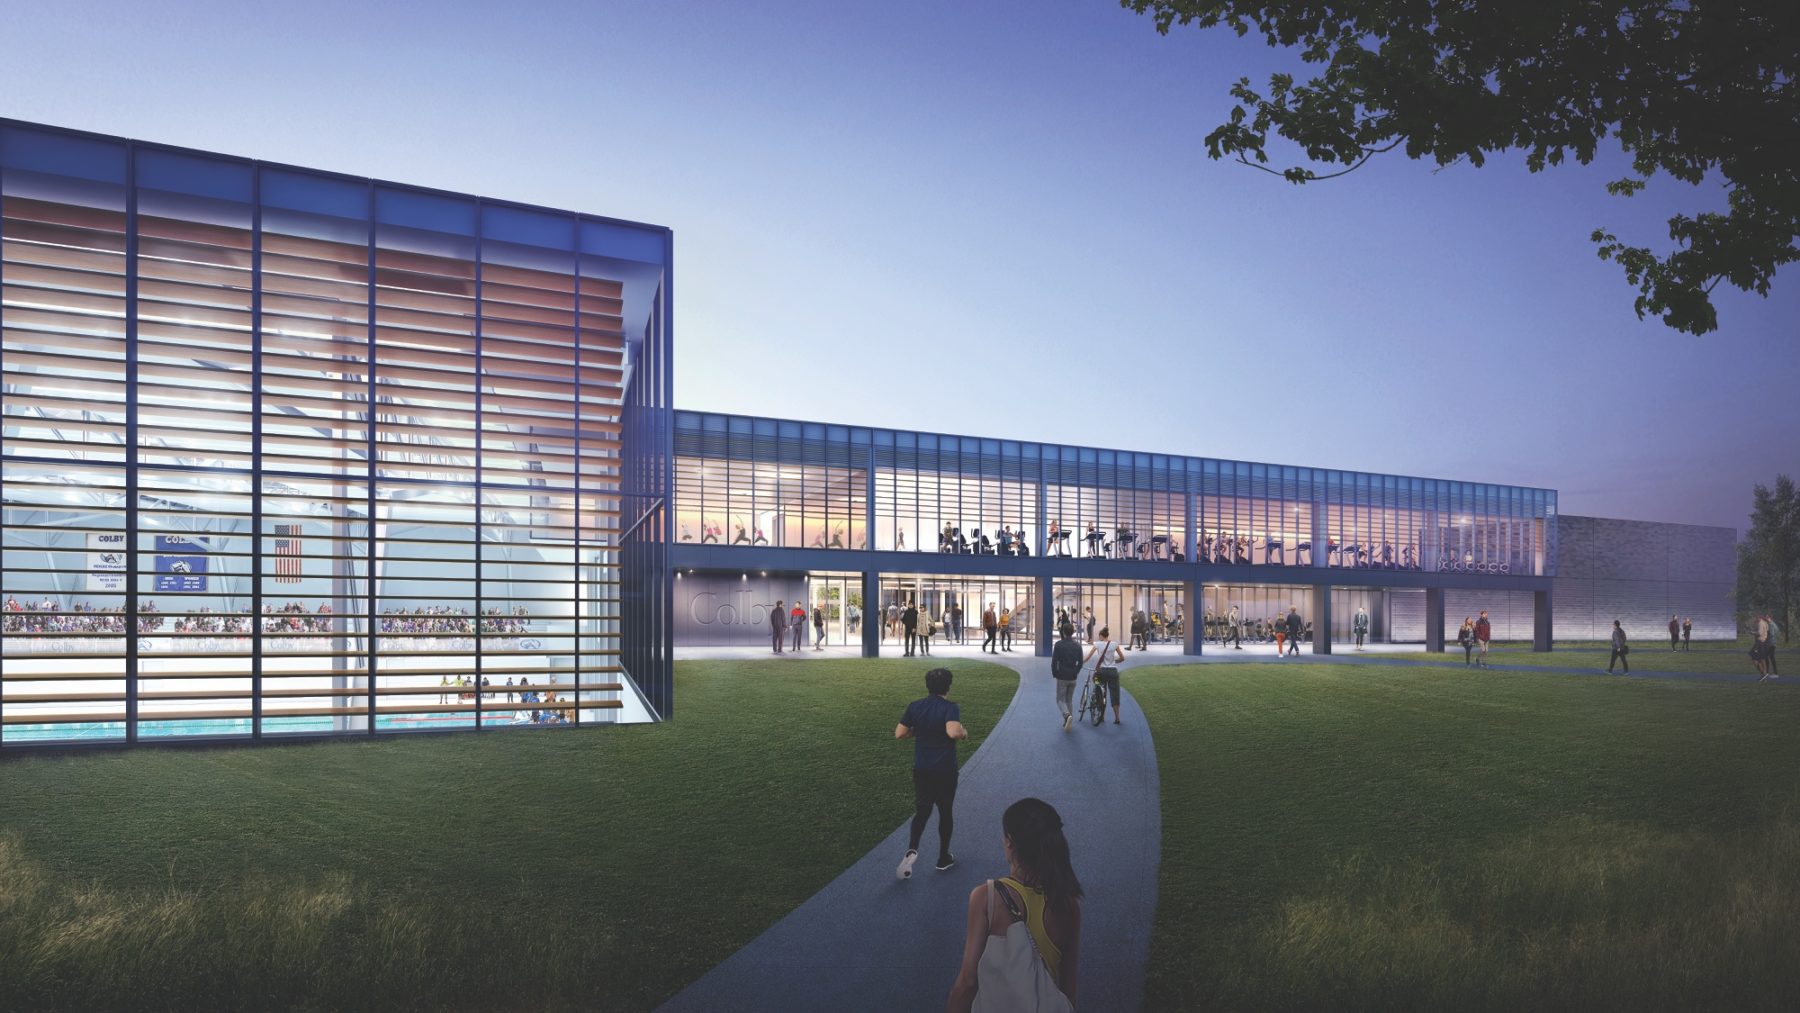 A rendering of the exterior of Colby College's athletics center